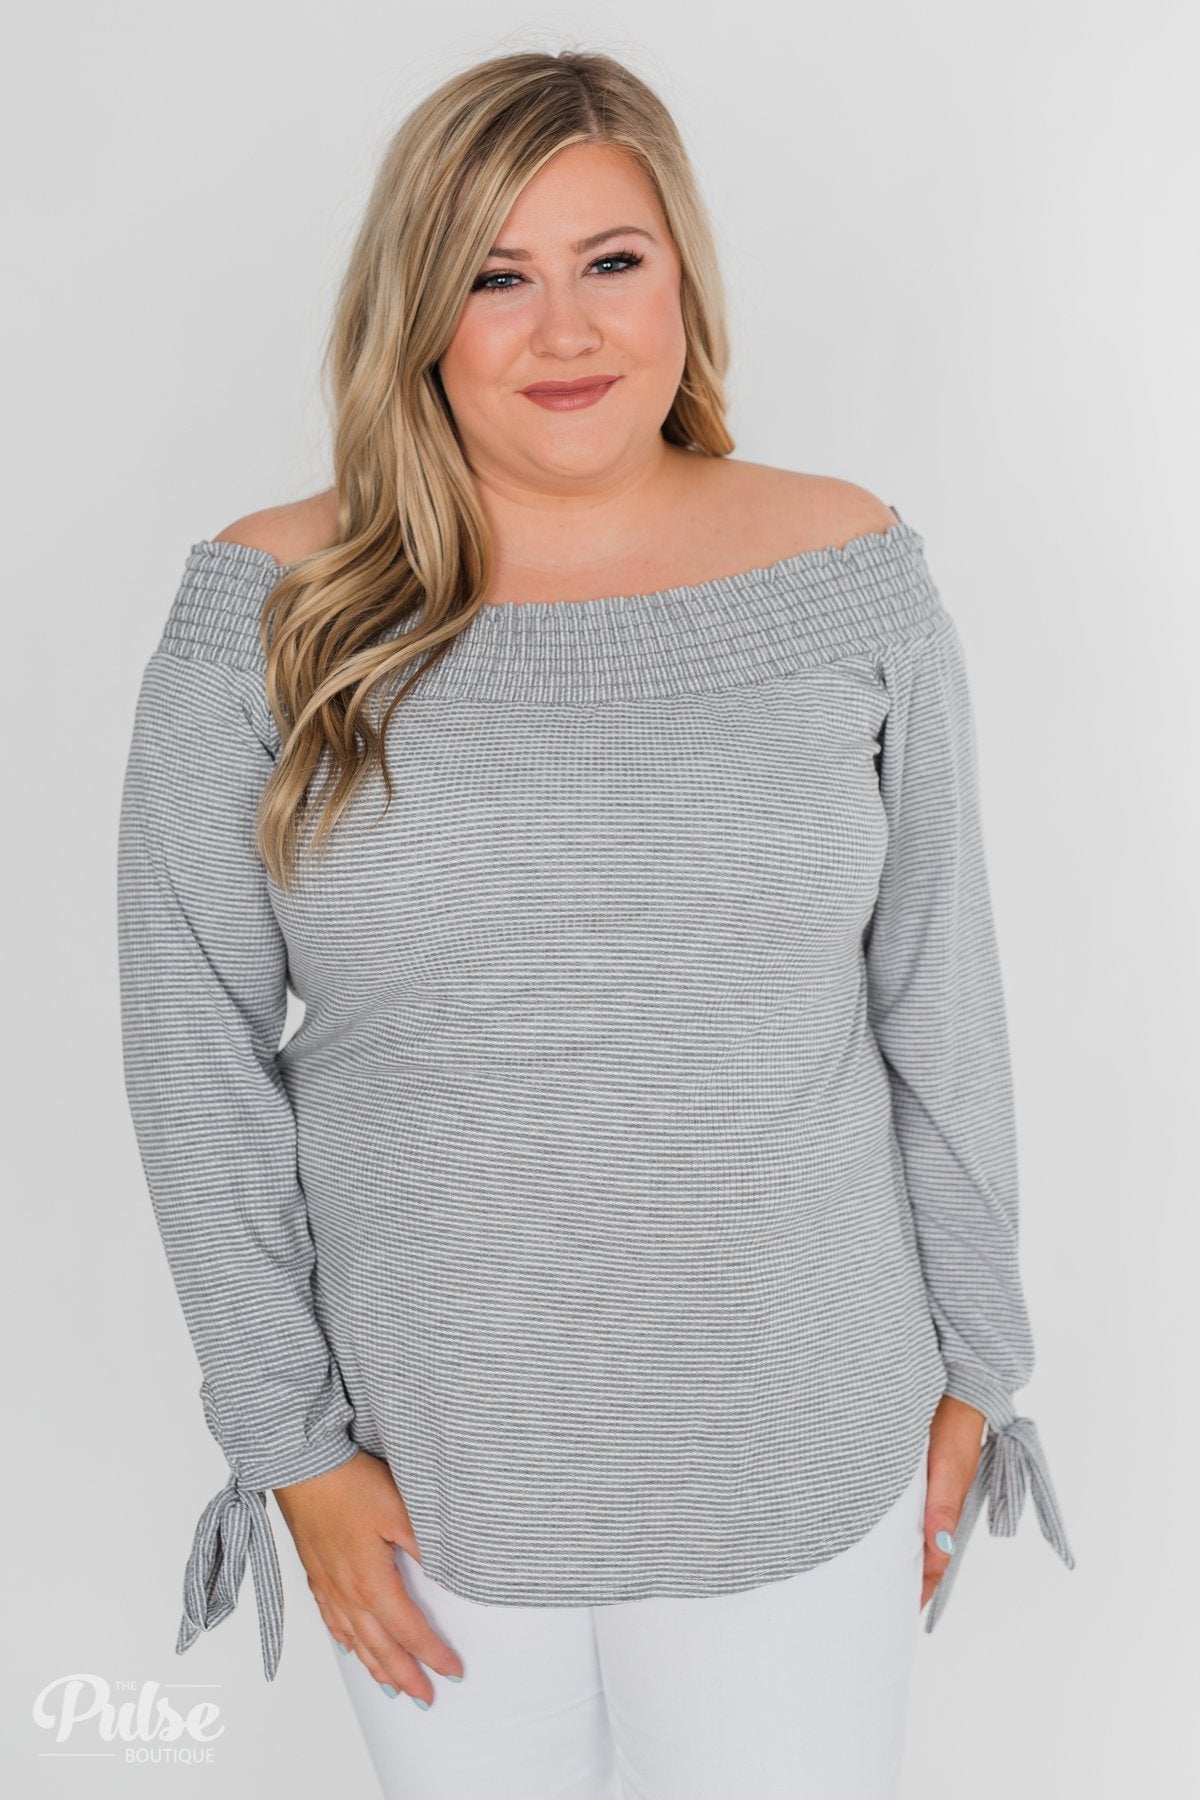 Dreaming of Stripes Off the Shoulder Top - Grey & White